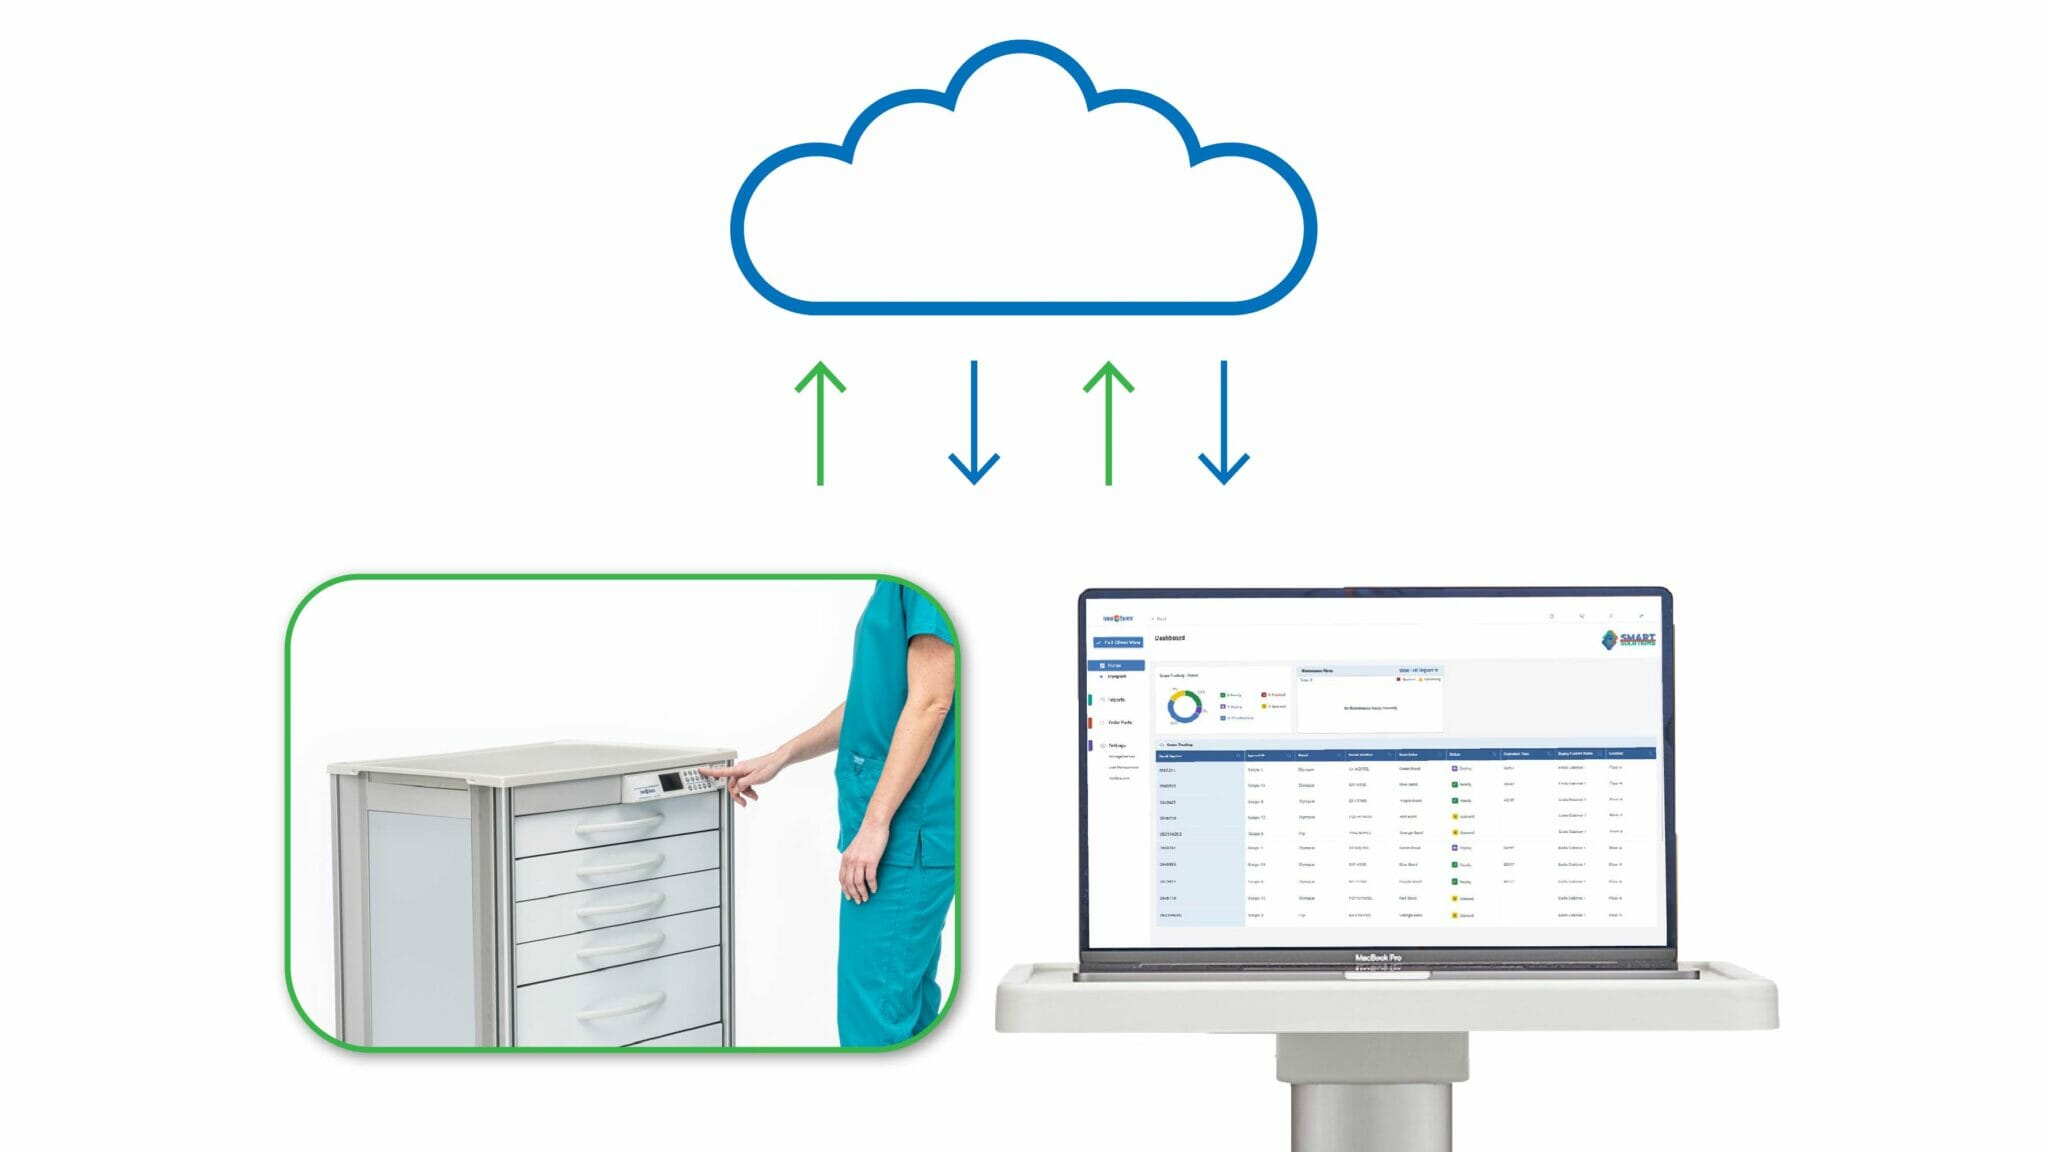 A cloud hovering above a hospital cart and a laptop, showing cloud-based security in a hospital